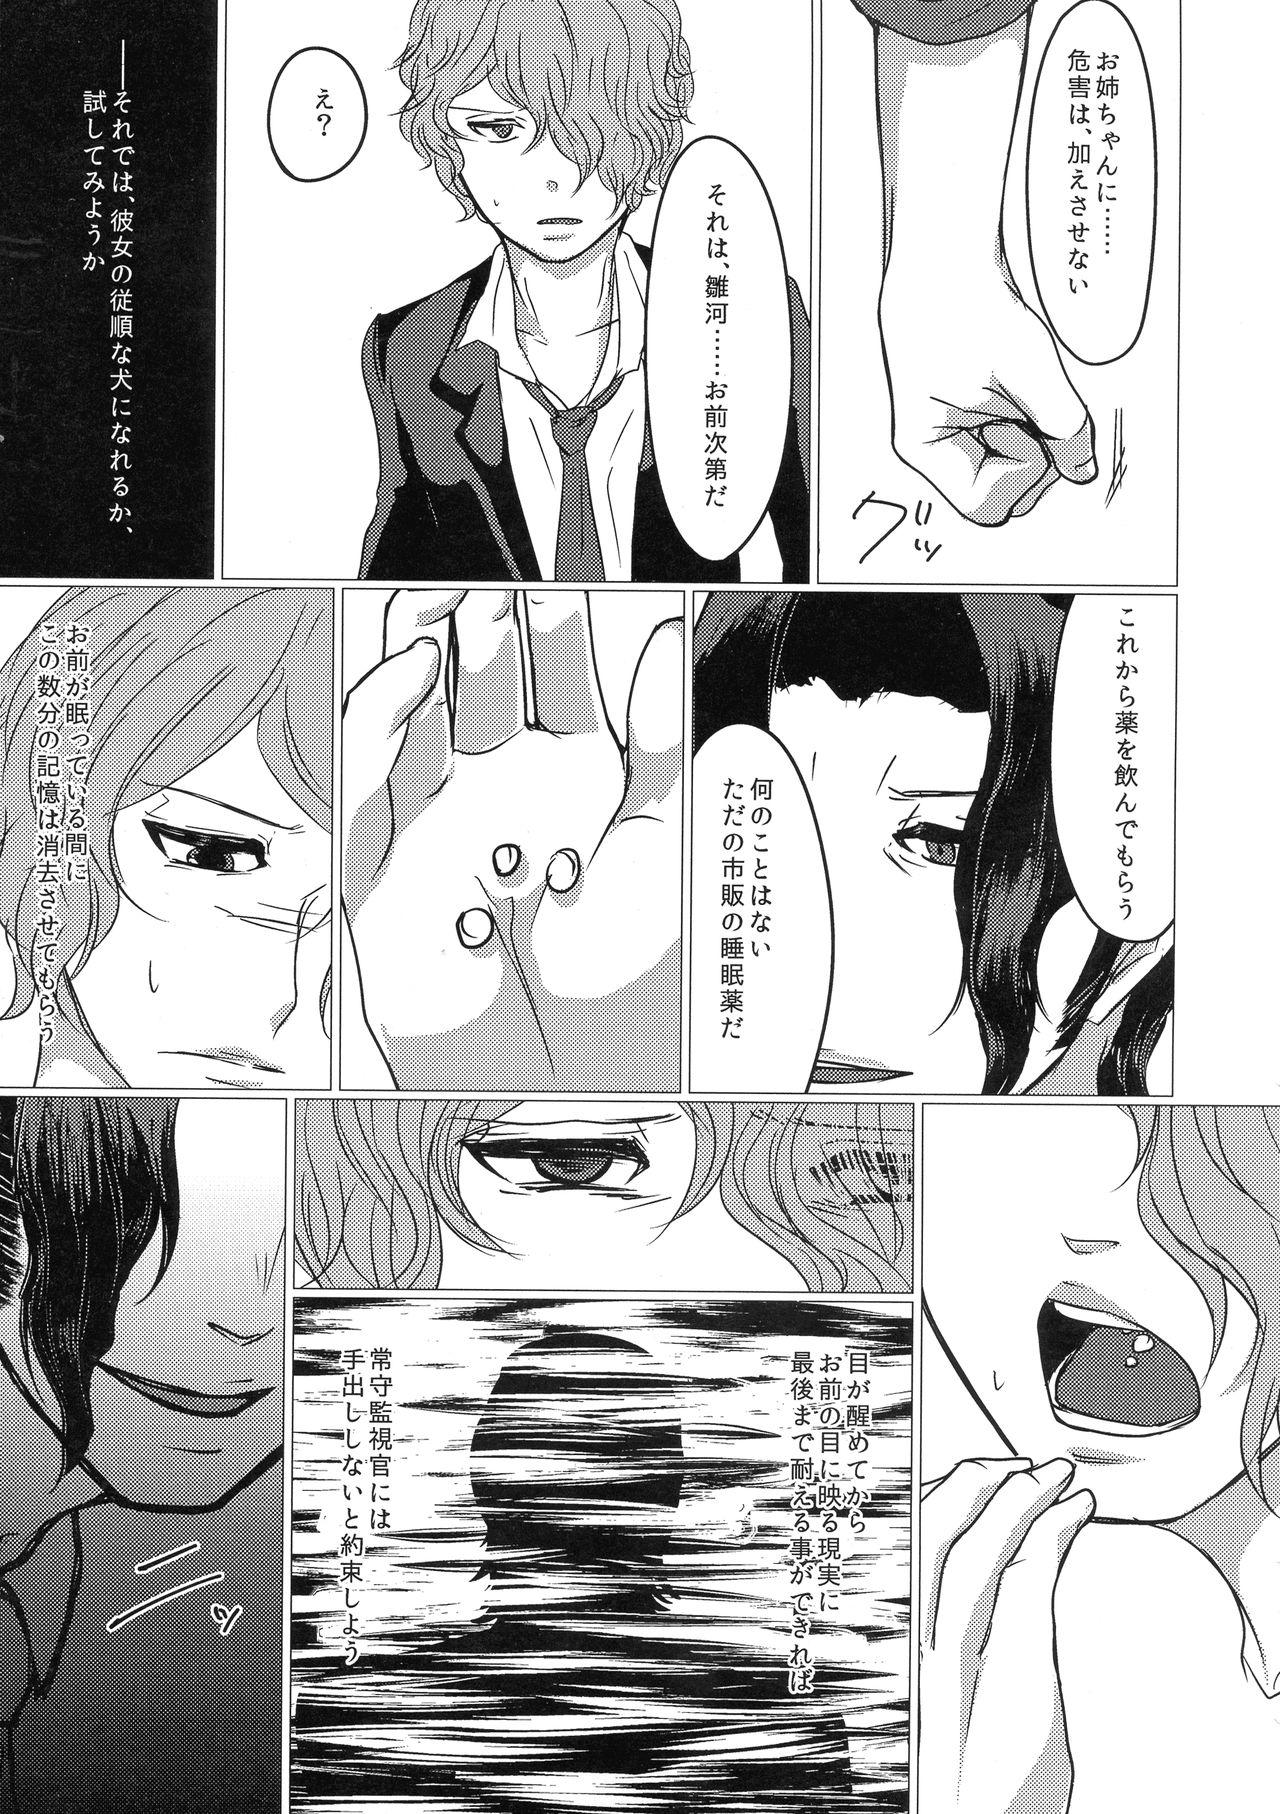 Spooning I/O - Psycho-pass Facefuck - Page 11